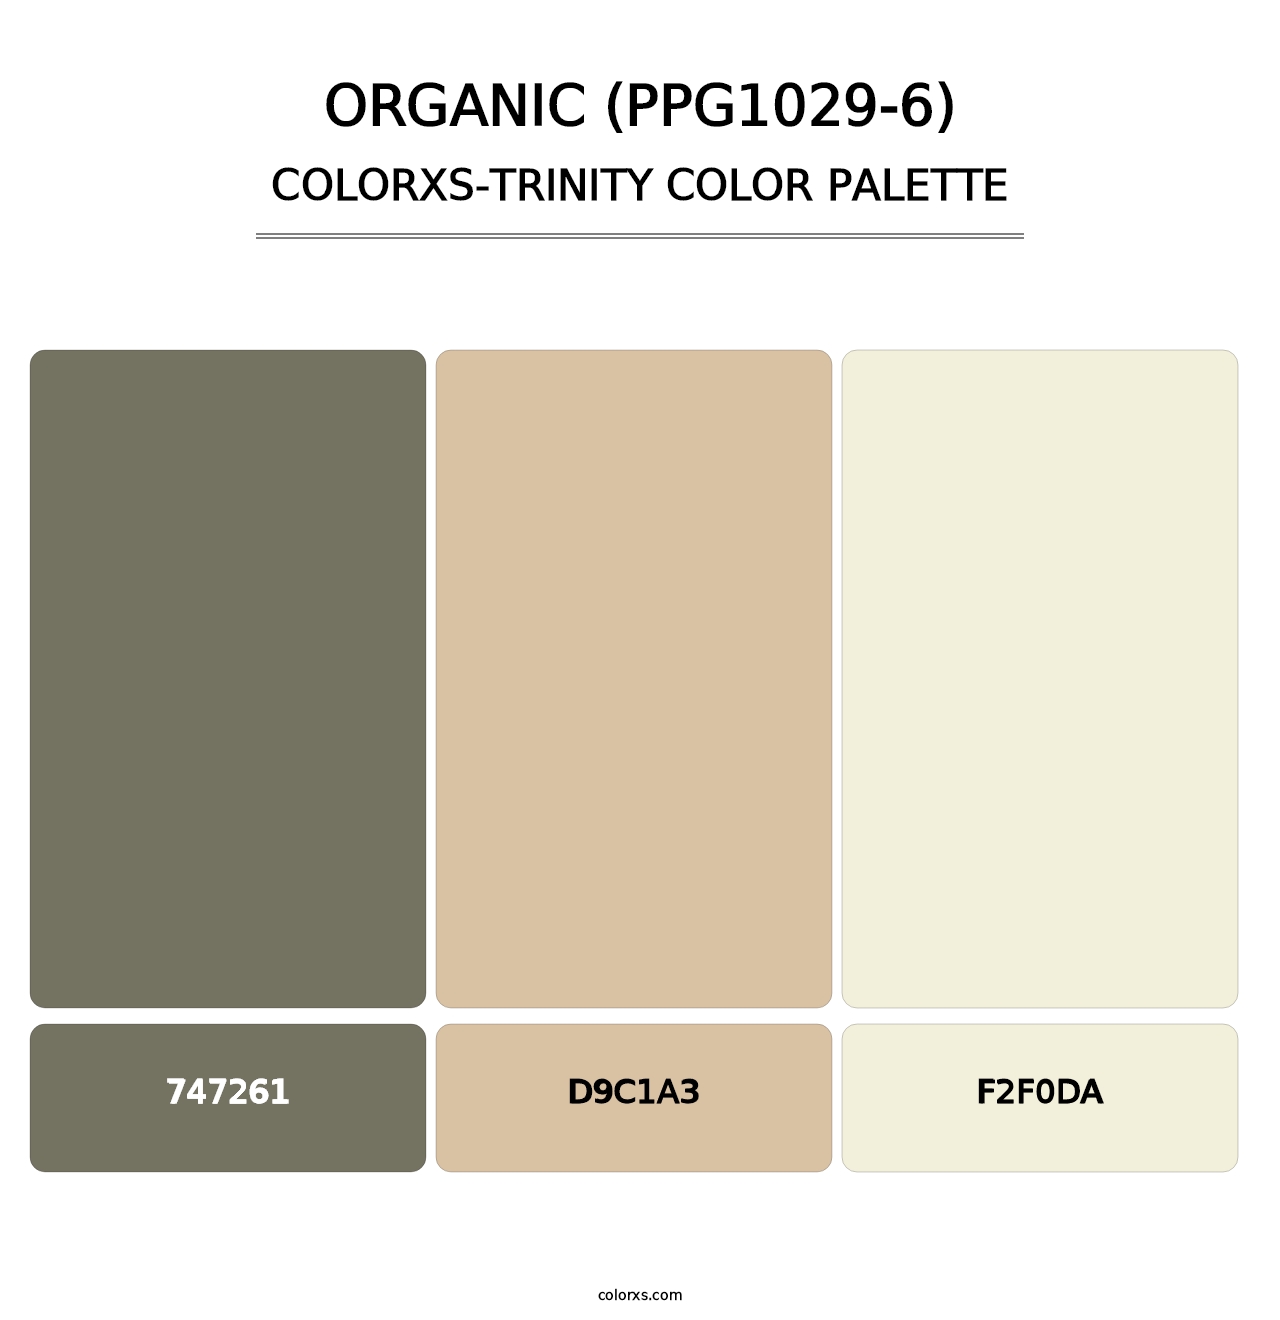 Organic (PPG1029-6) - Colorxs Trinity Palette